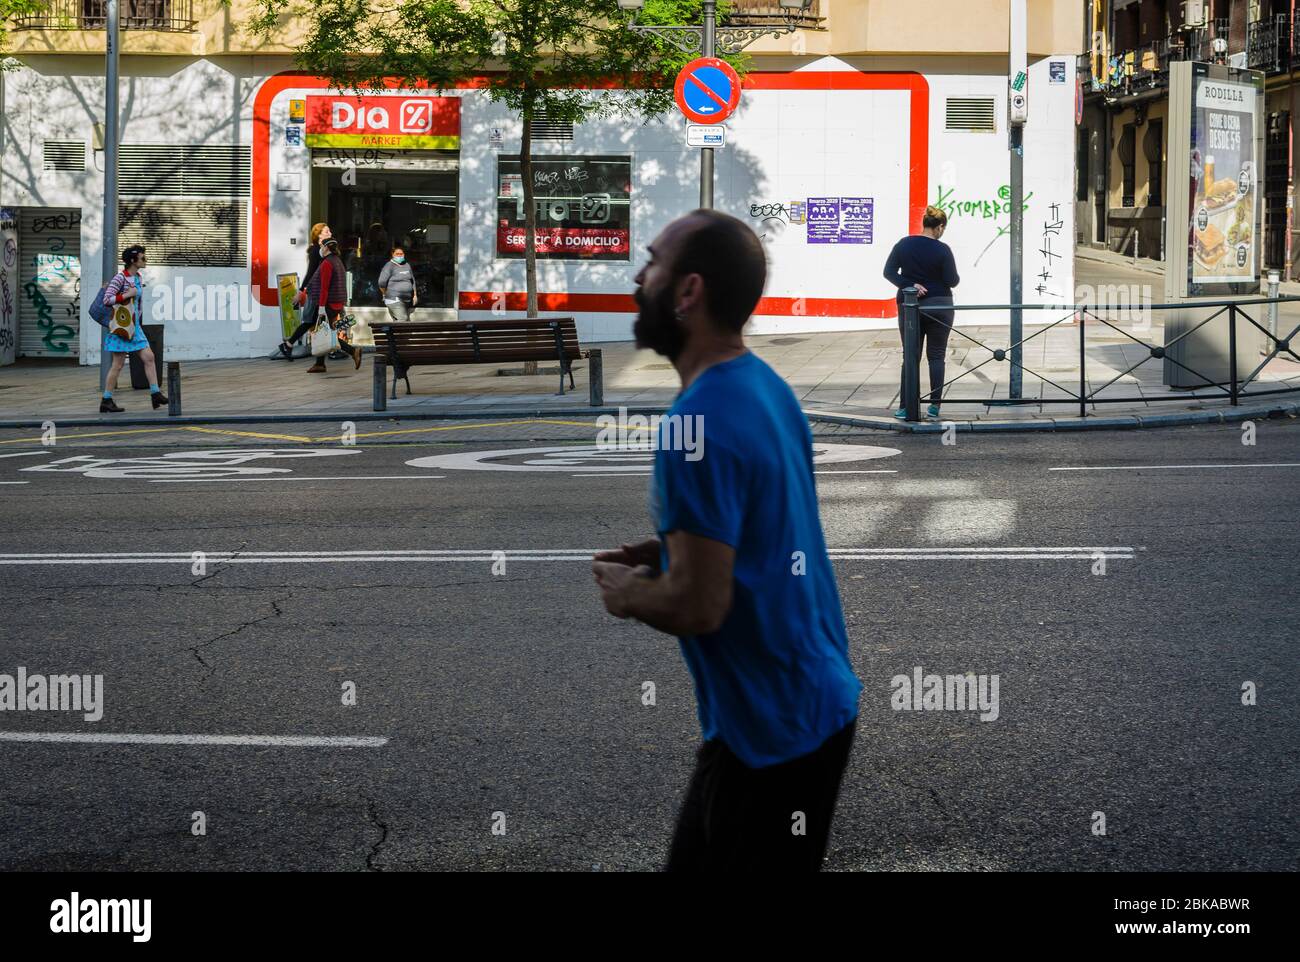 Madrid, Spain, 2 th May 2020. View of a runner in San Bernardo street the first day people can walking and practise sport due the confine by coronavir Stock Photo